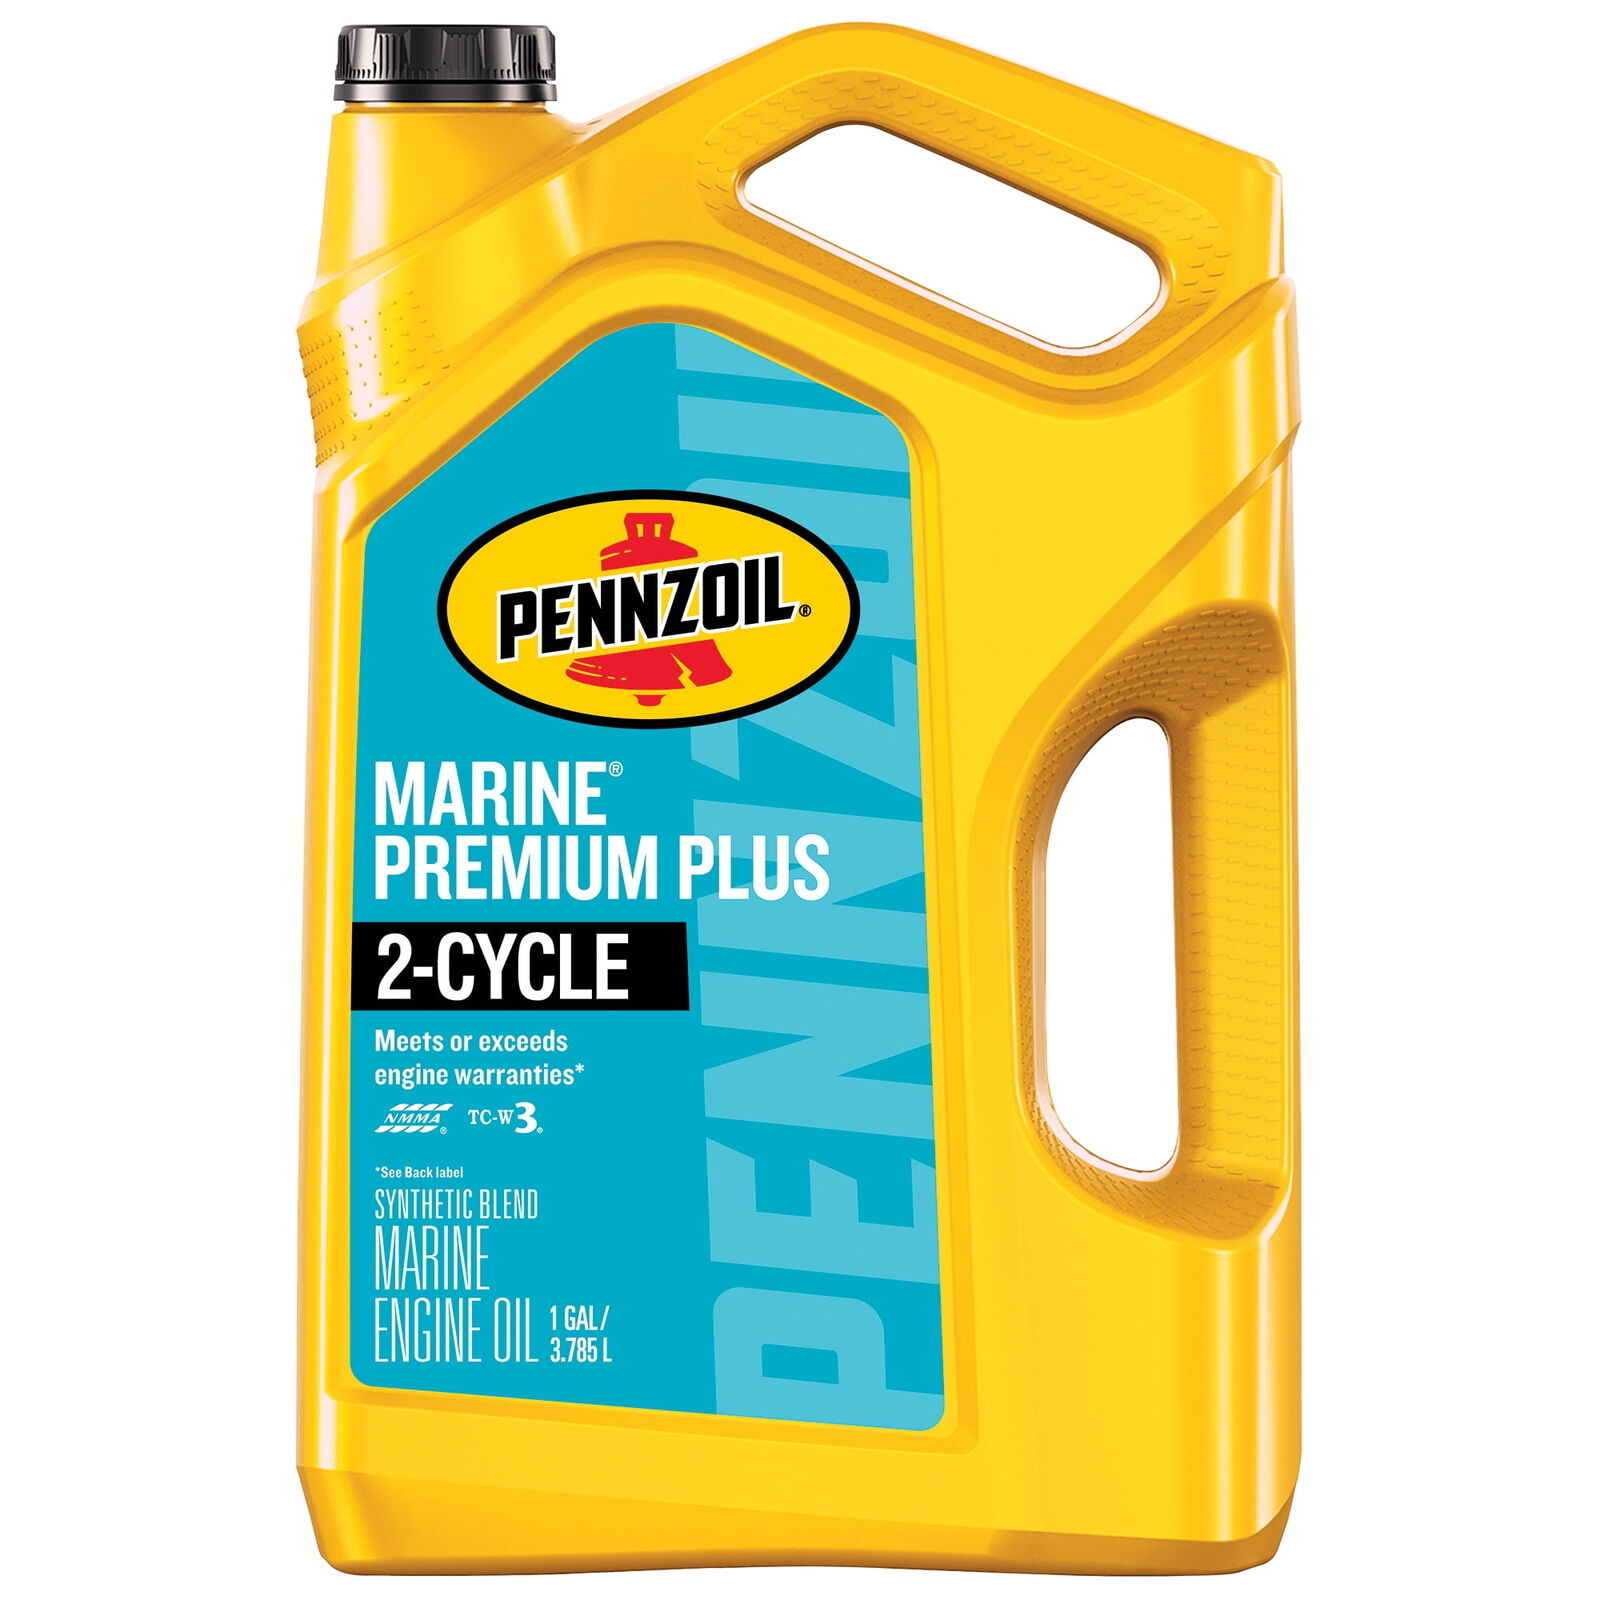 Marine Premium Plus 2-Cycle Synthetic Blend Boat Motor Oil, 1 Gallon